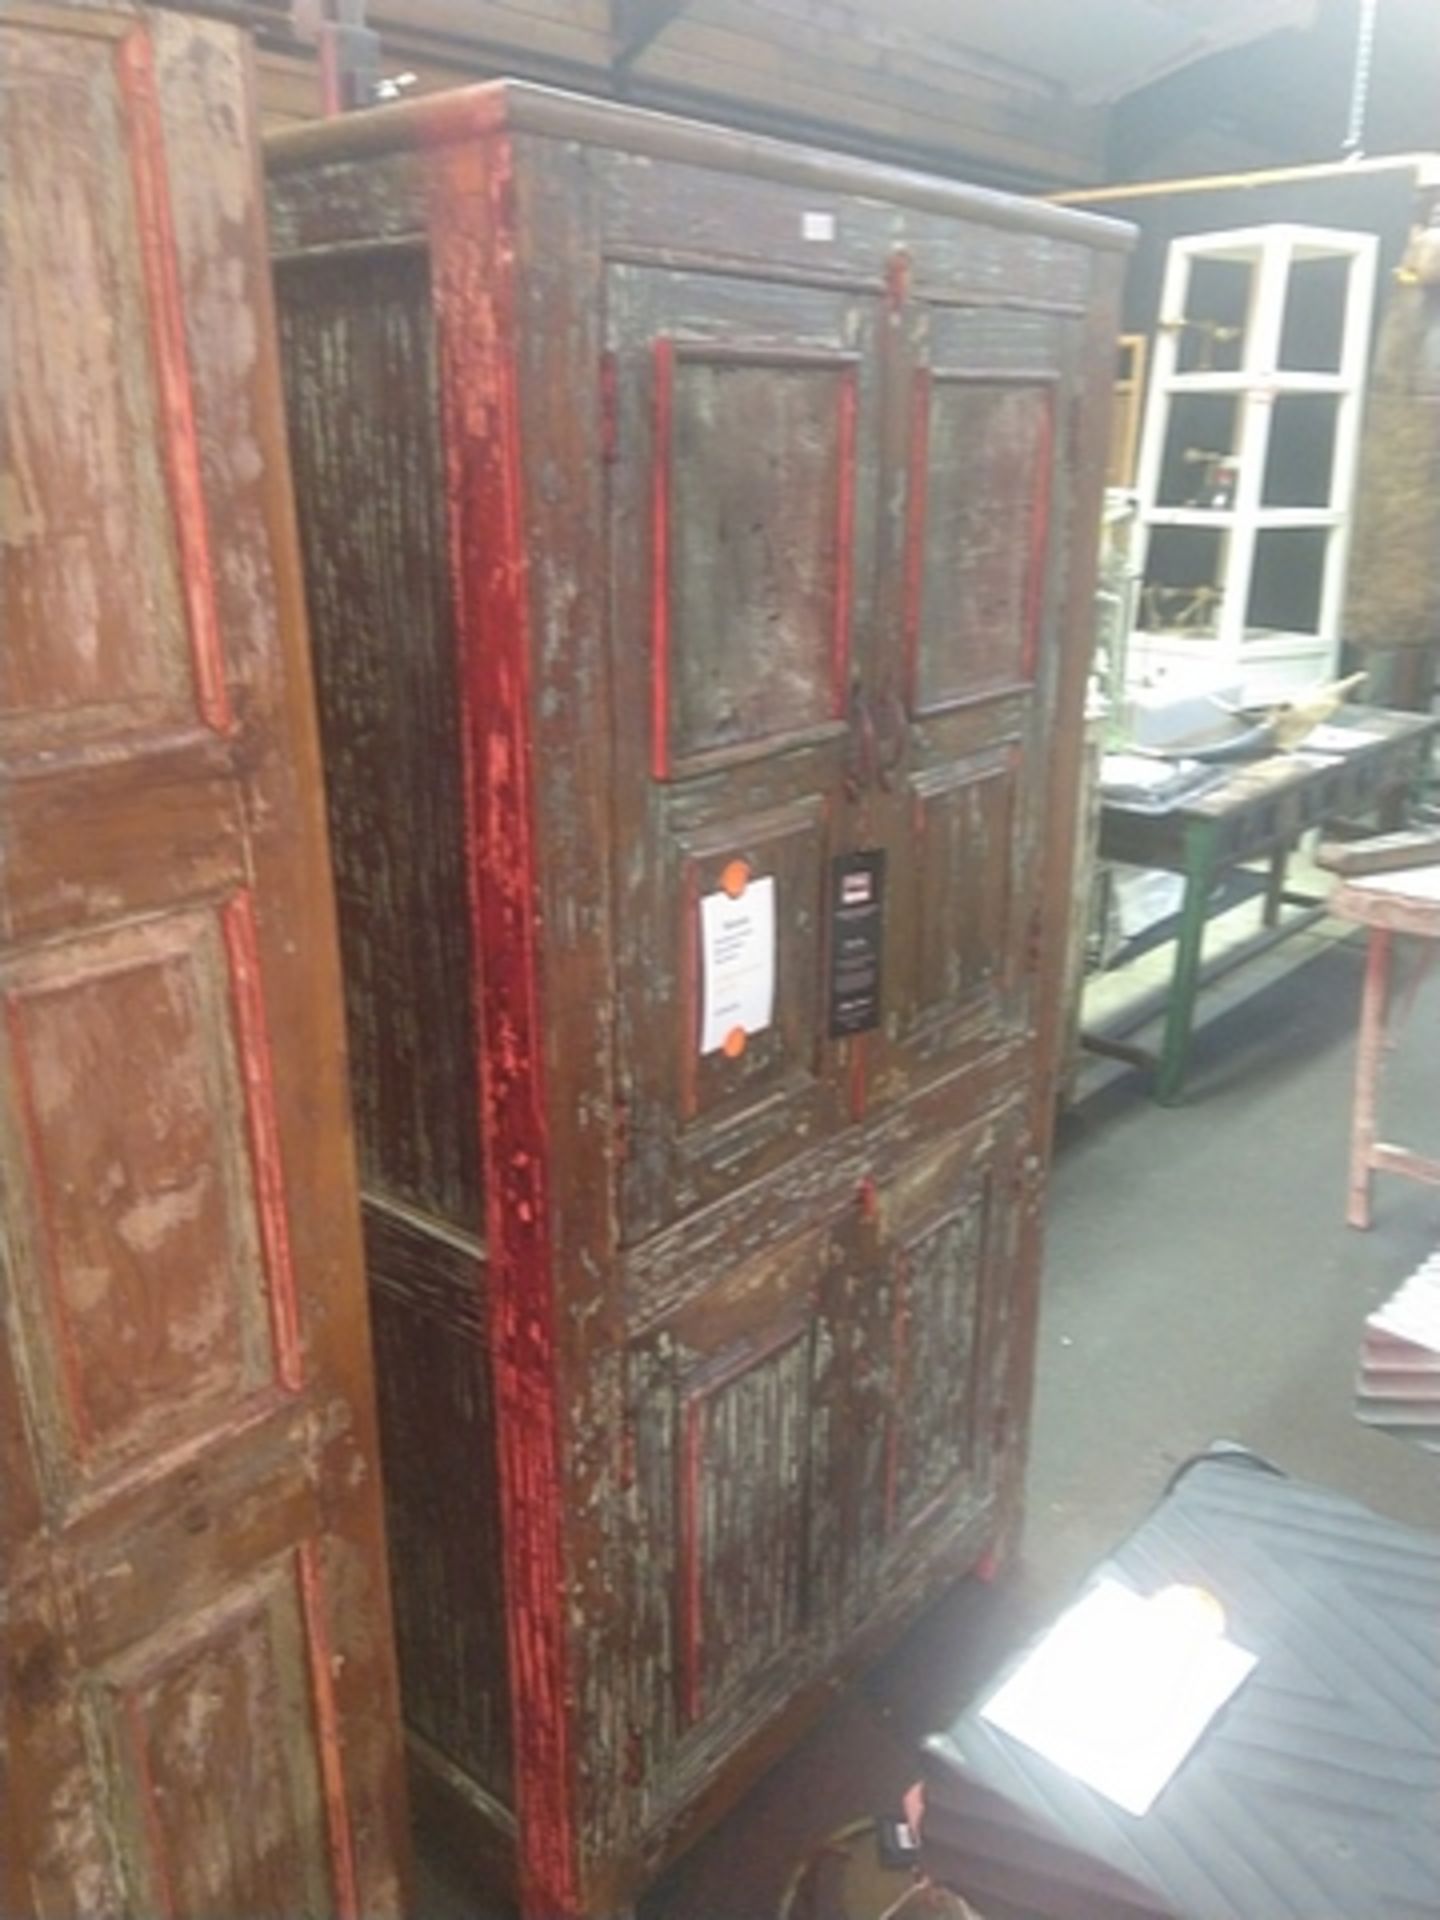 Antique wood cabinet in Teak wood, Rosewood, Indian wood in traditional patterns. With antique - Image 2 of 2